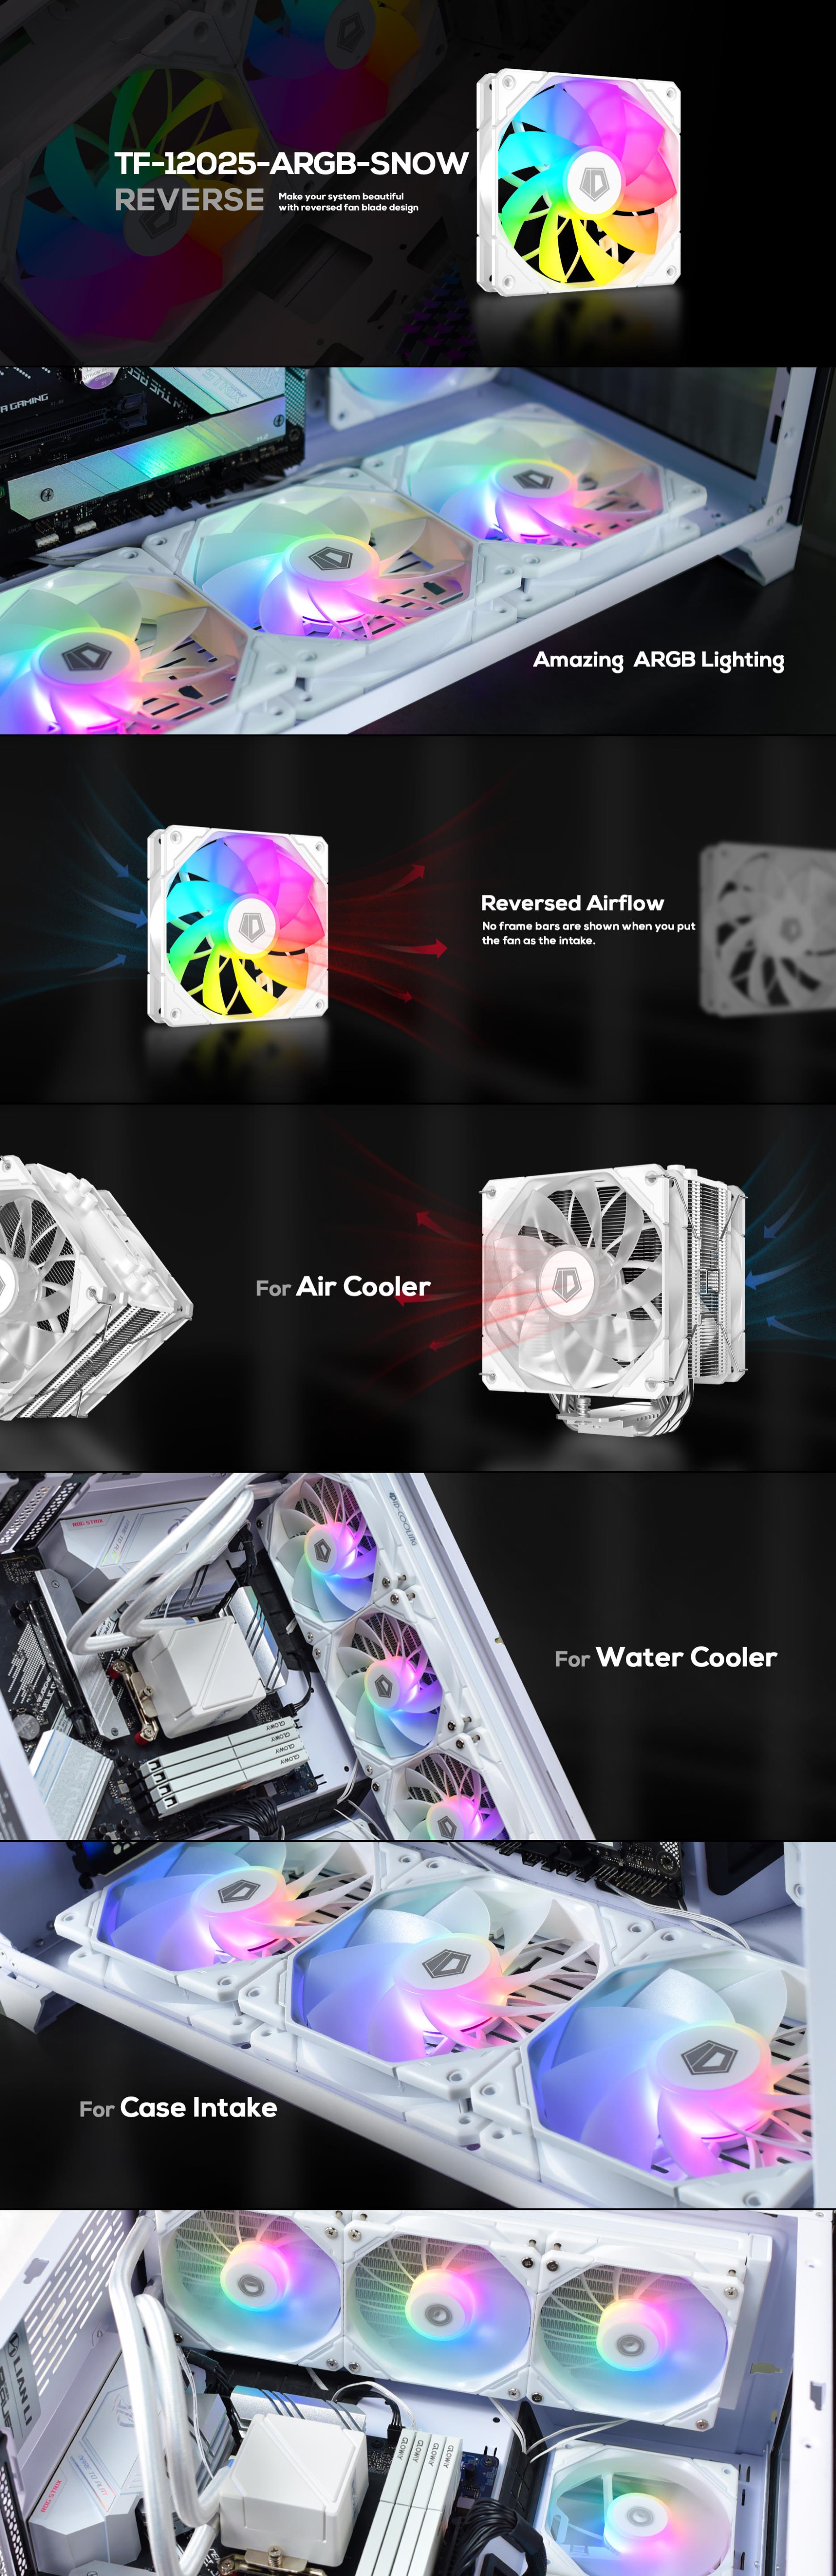 A large marketing image providing additional information about the product ID-COOLING TF Series 120mm ARGB Reverse Case Fan - Snow Edition - Additional alt info not provided